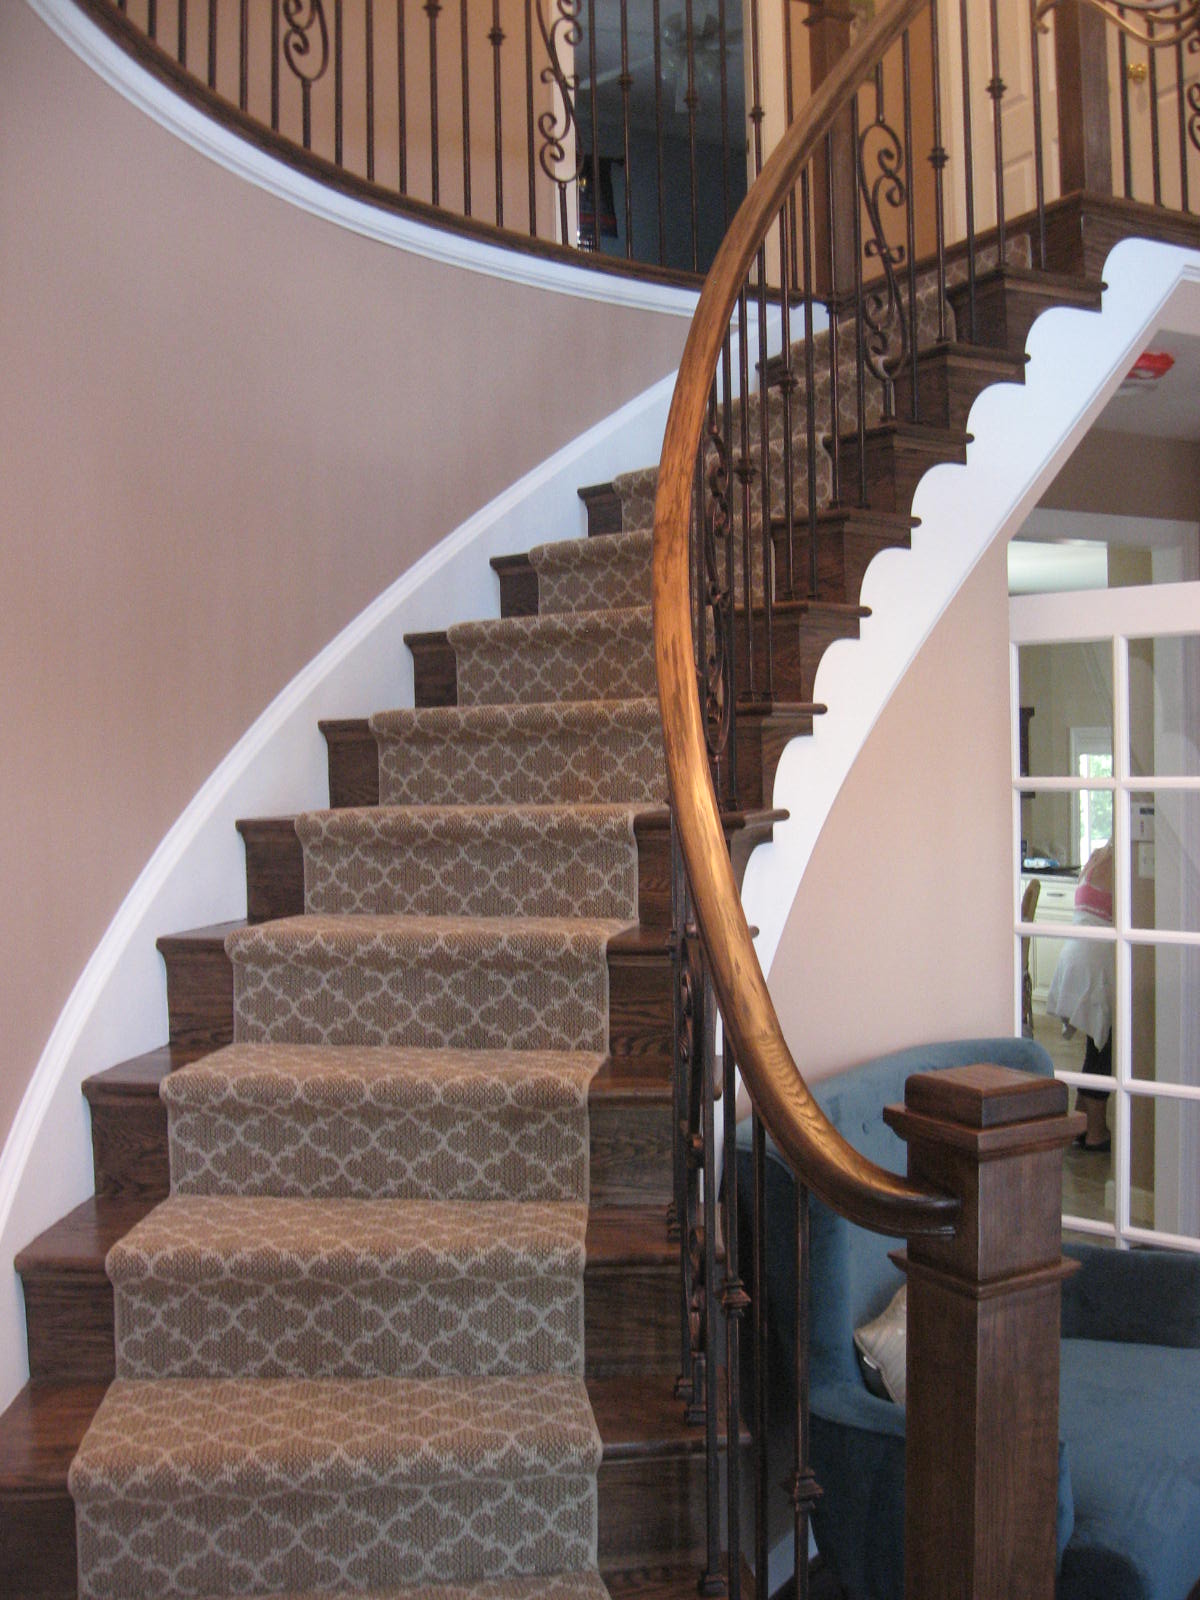 wood stair and rails with carpet runner and metal balusters